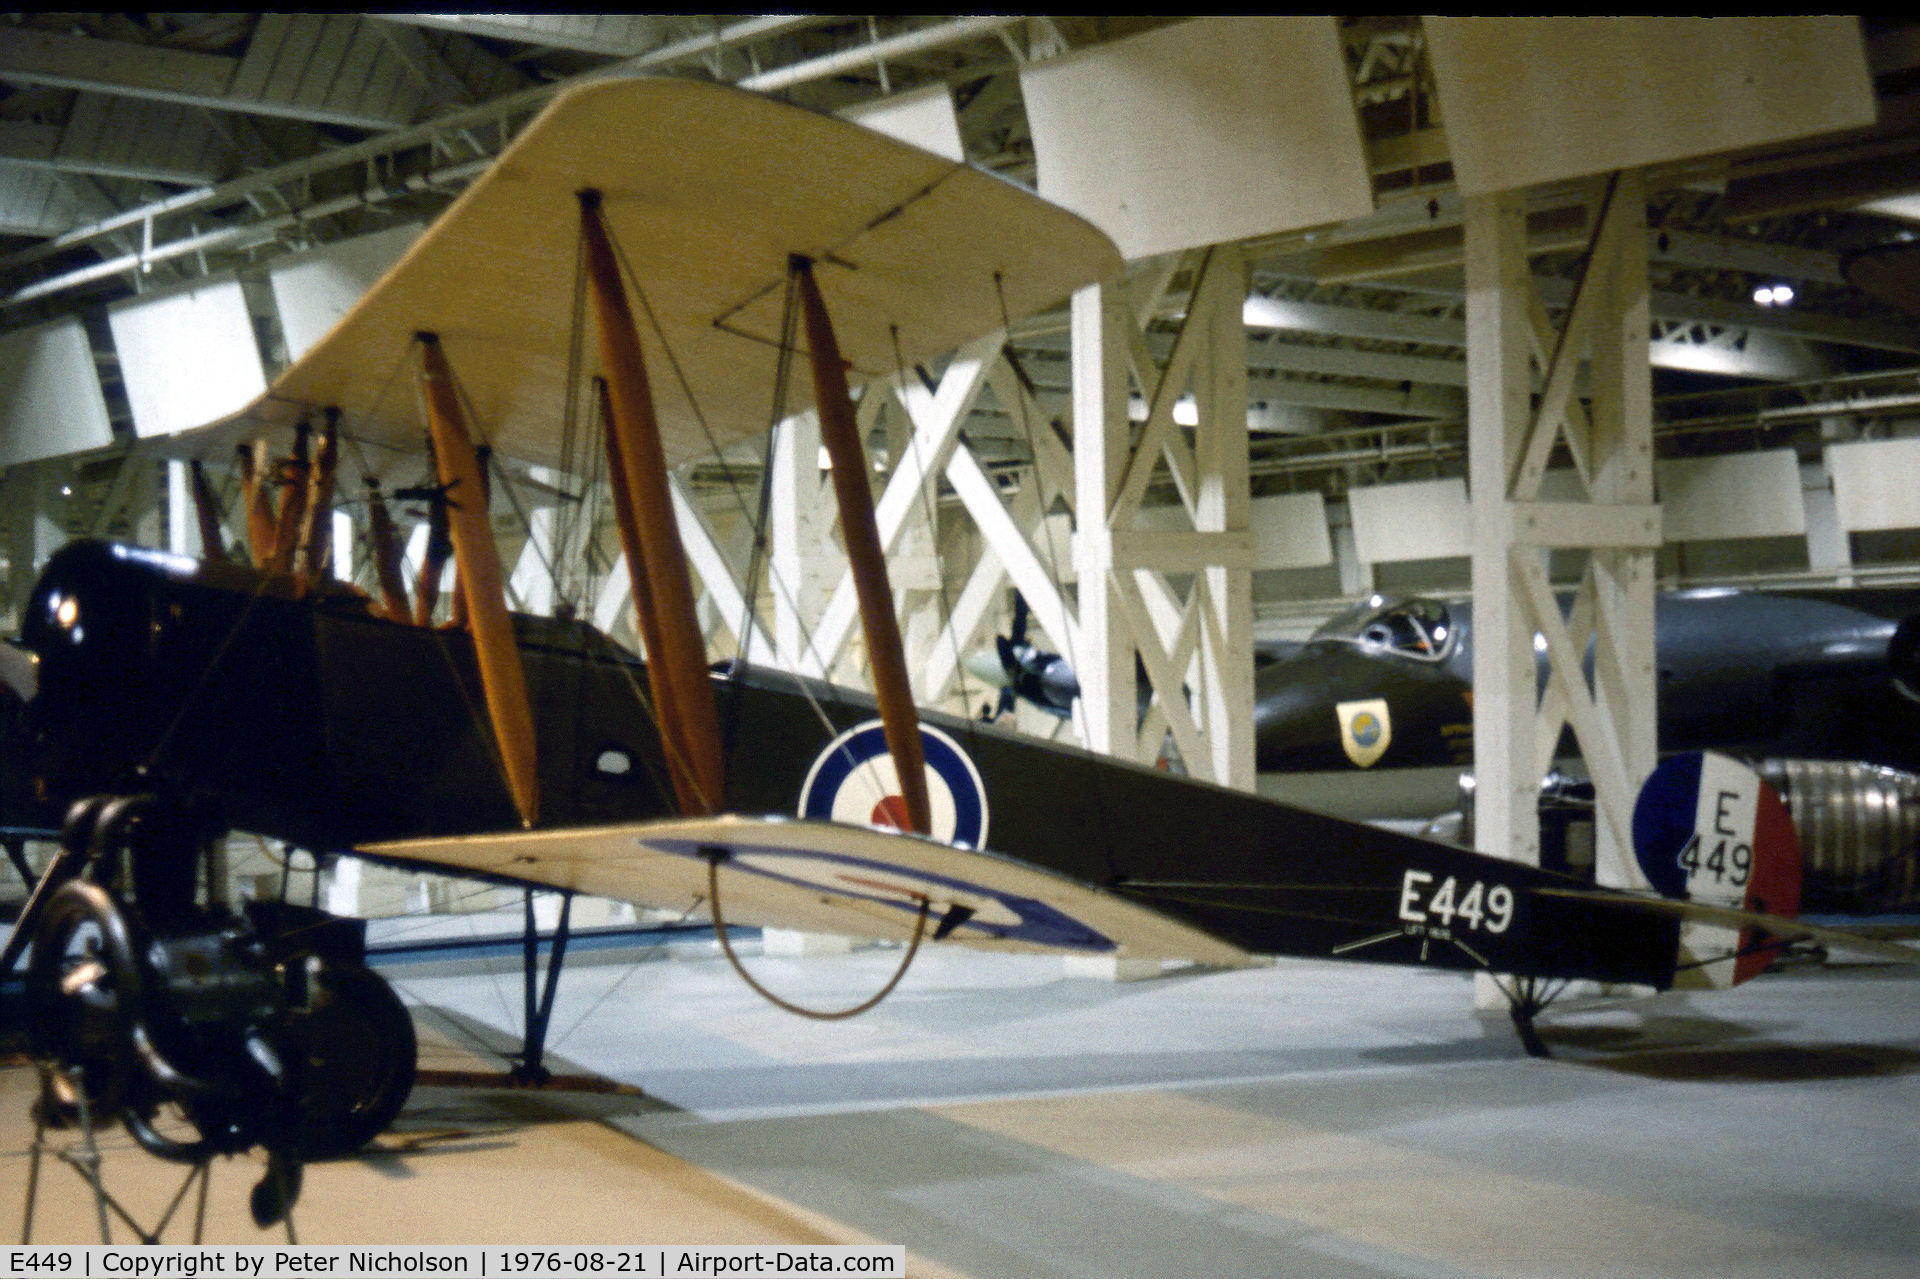 E449, 1966 Avro 504K C/N 927, Avro 504K as displayed at the Royal Air Force Museum at Hendon in the Summer of 1976.